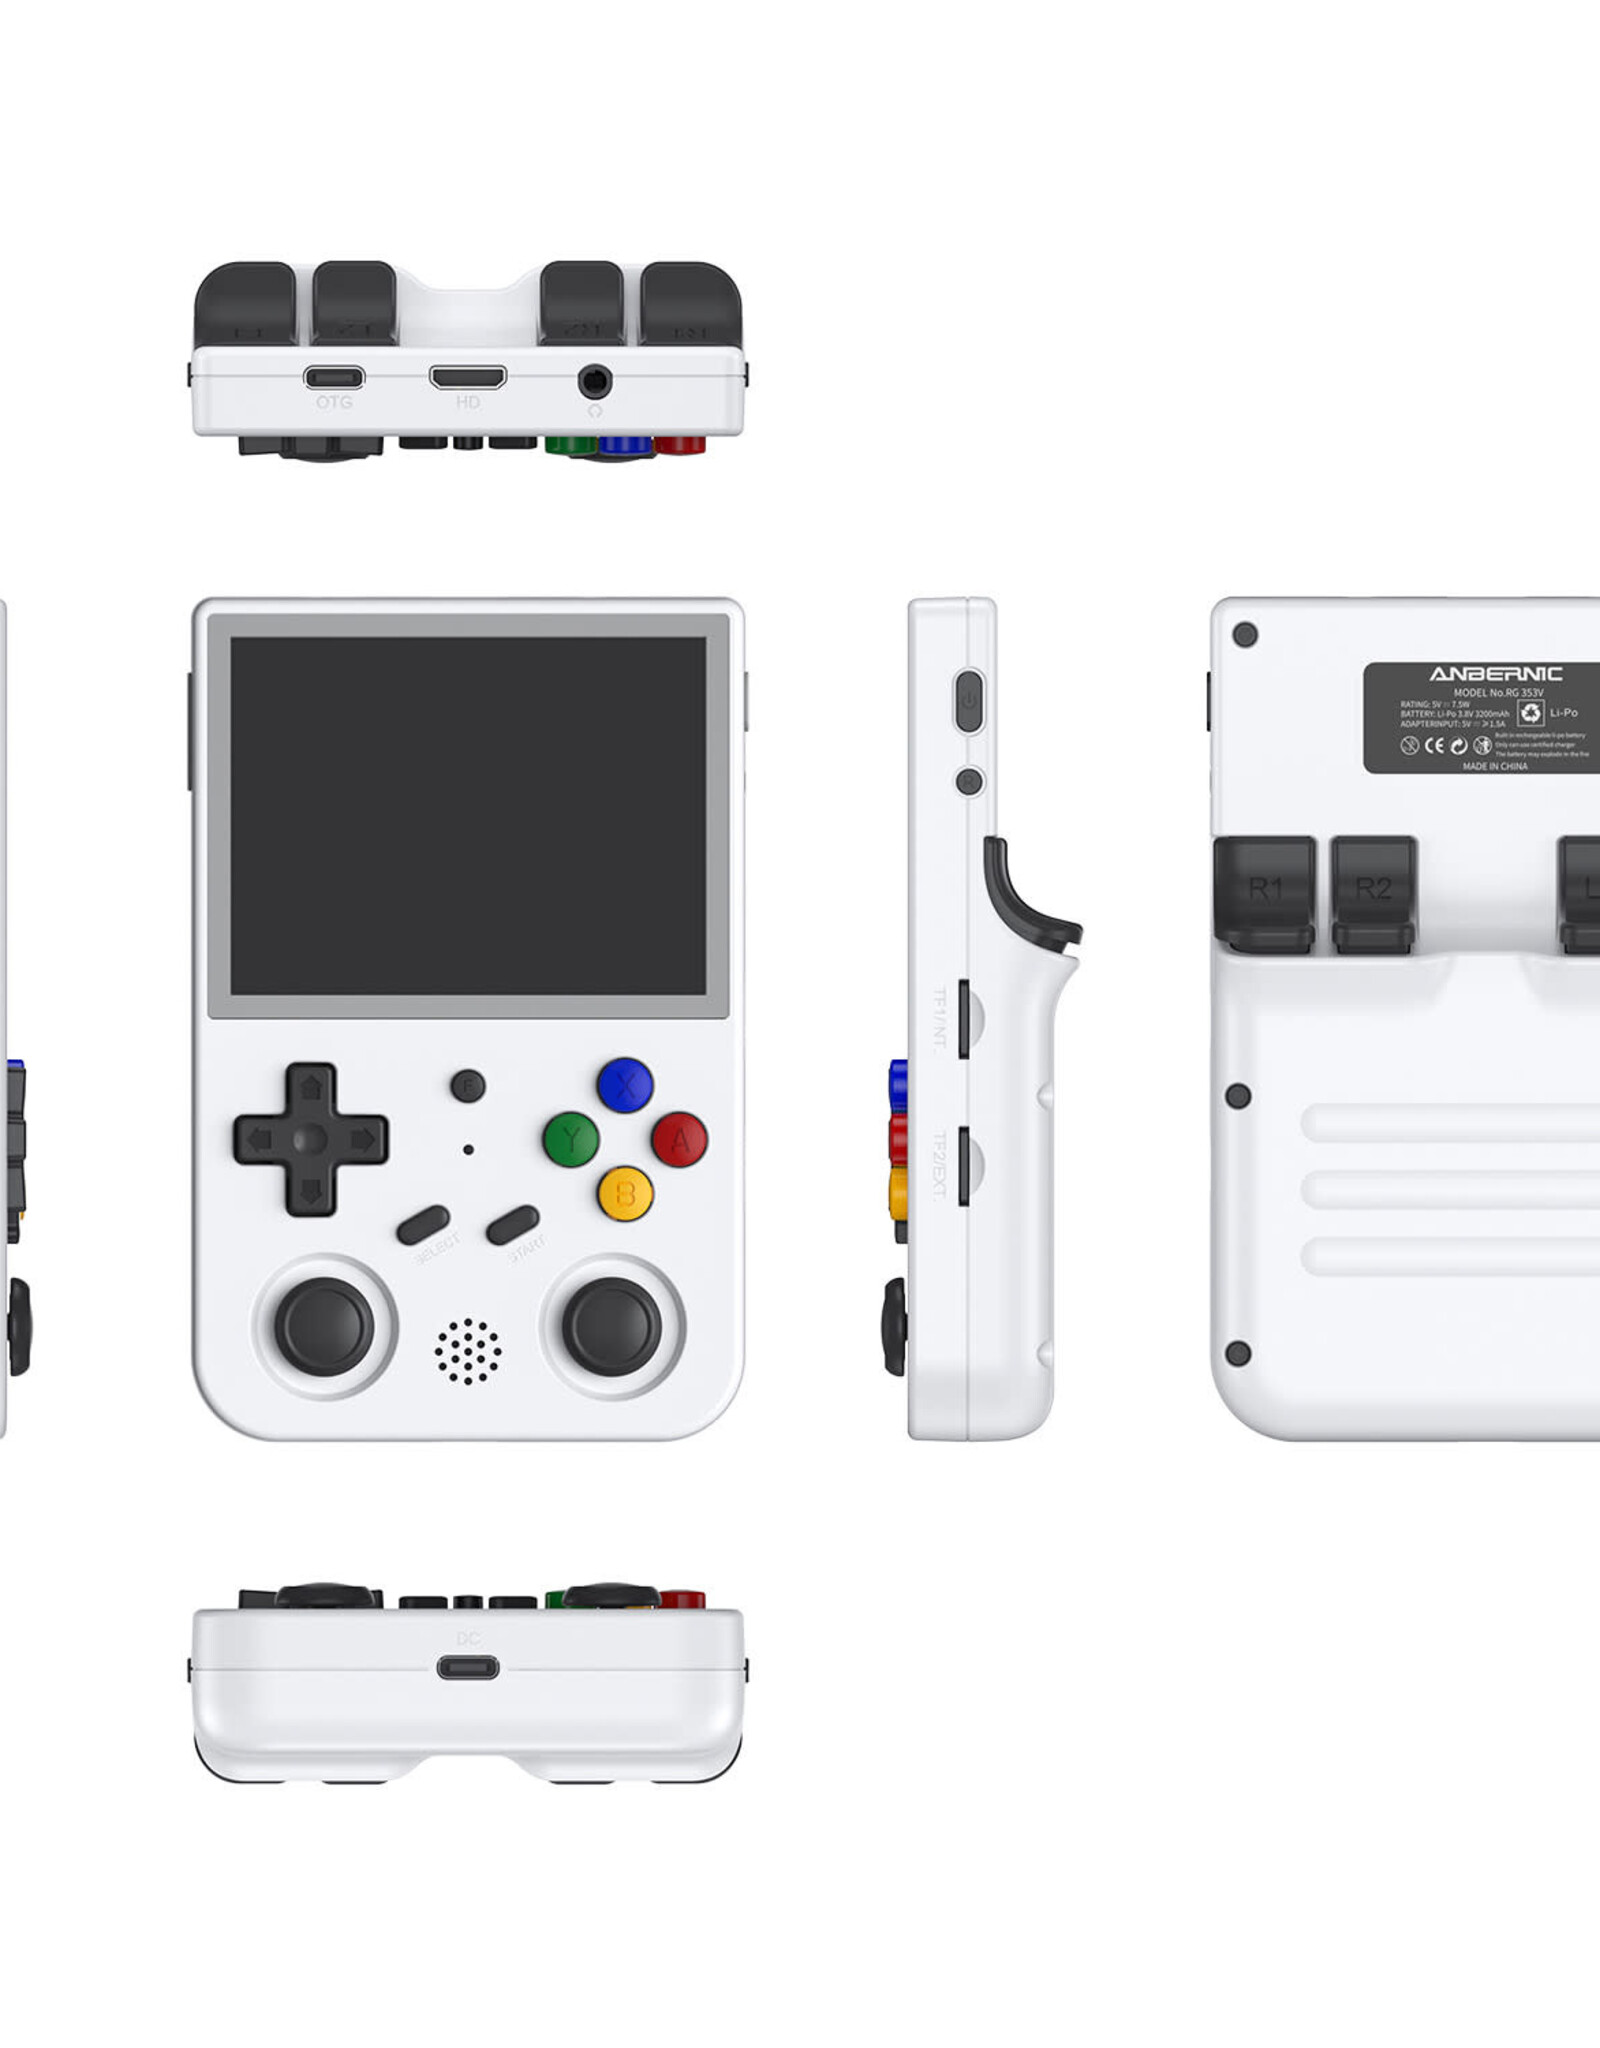 RG353V Retro Handheld Game with Dual OS Android 11 and Linux,RG353V with  64G TF Card Pre-Installed 4452 Games Supports 5G WiFi 4.2 Bluetooth Online